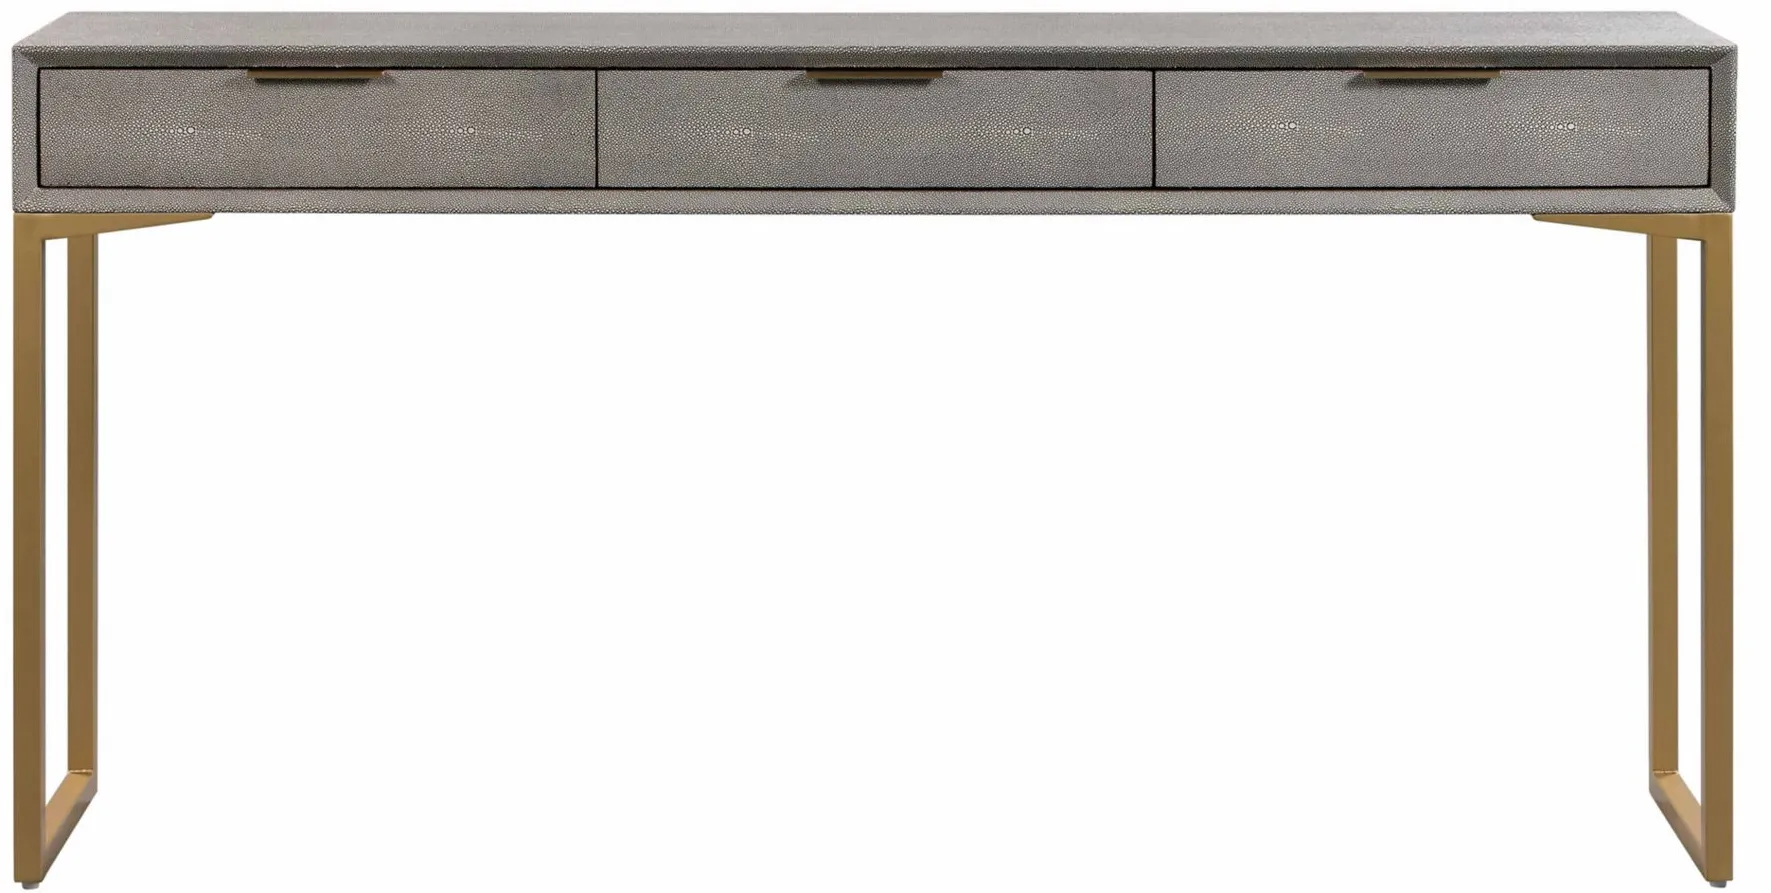 Pesce Console Table in Grey by Tov Furniture